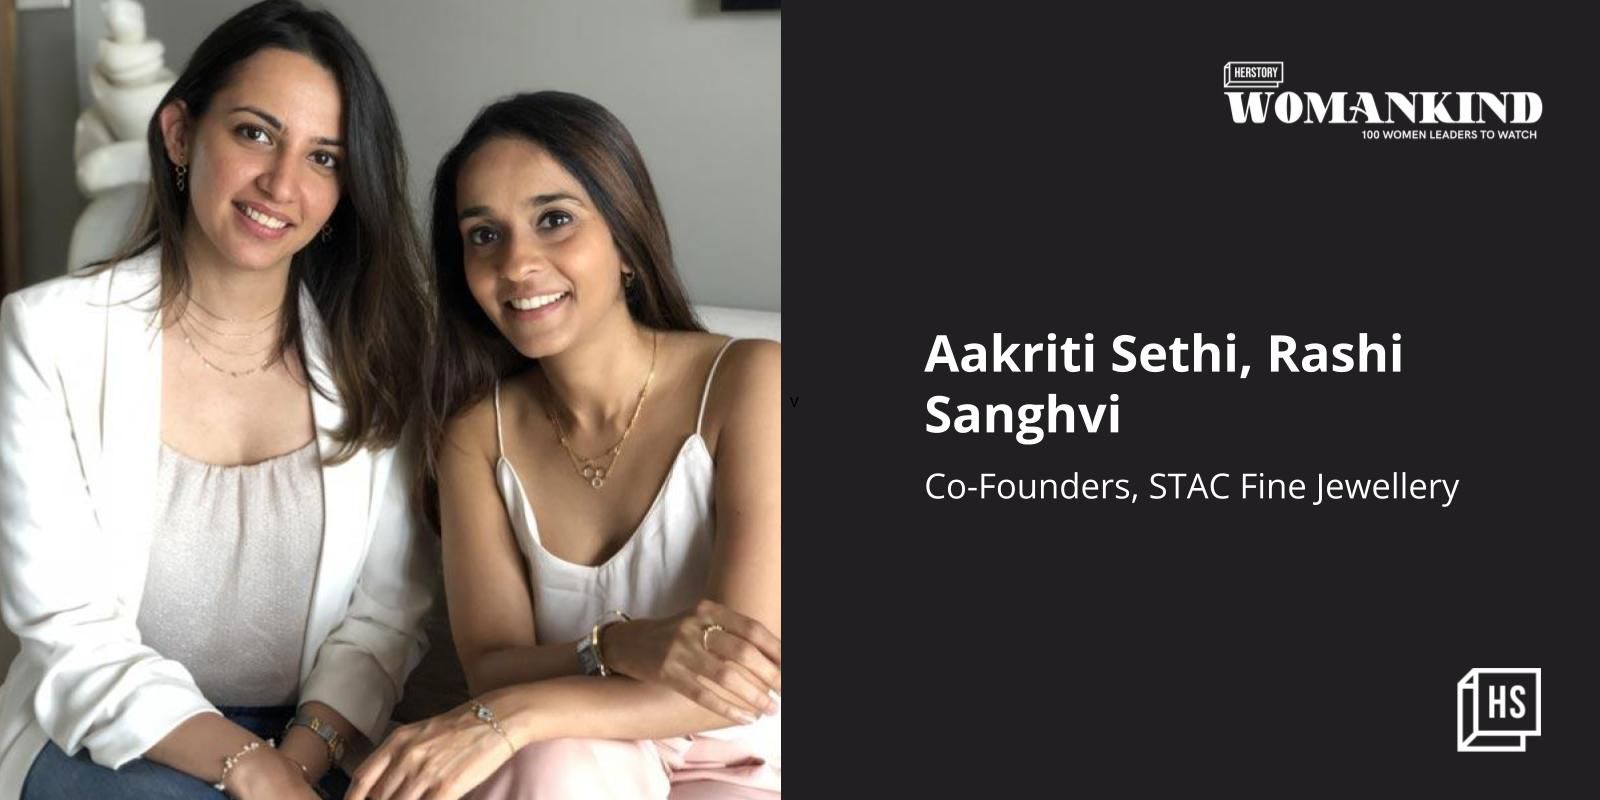 [100 Emerging Women Leaders] These women entrepreneurs started up to make every day fine jewellery 
